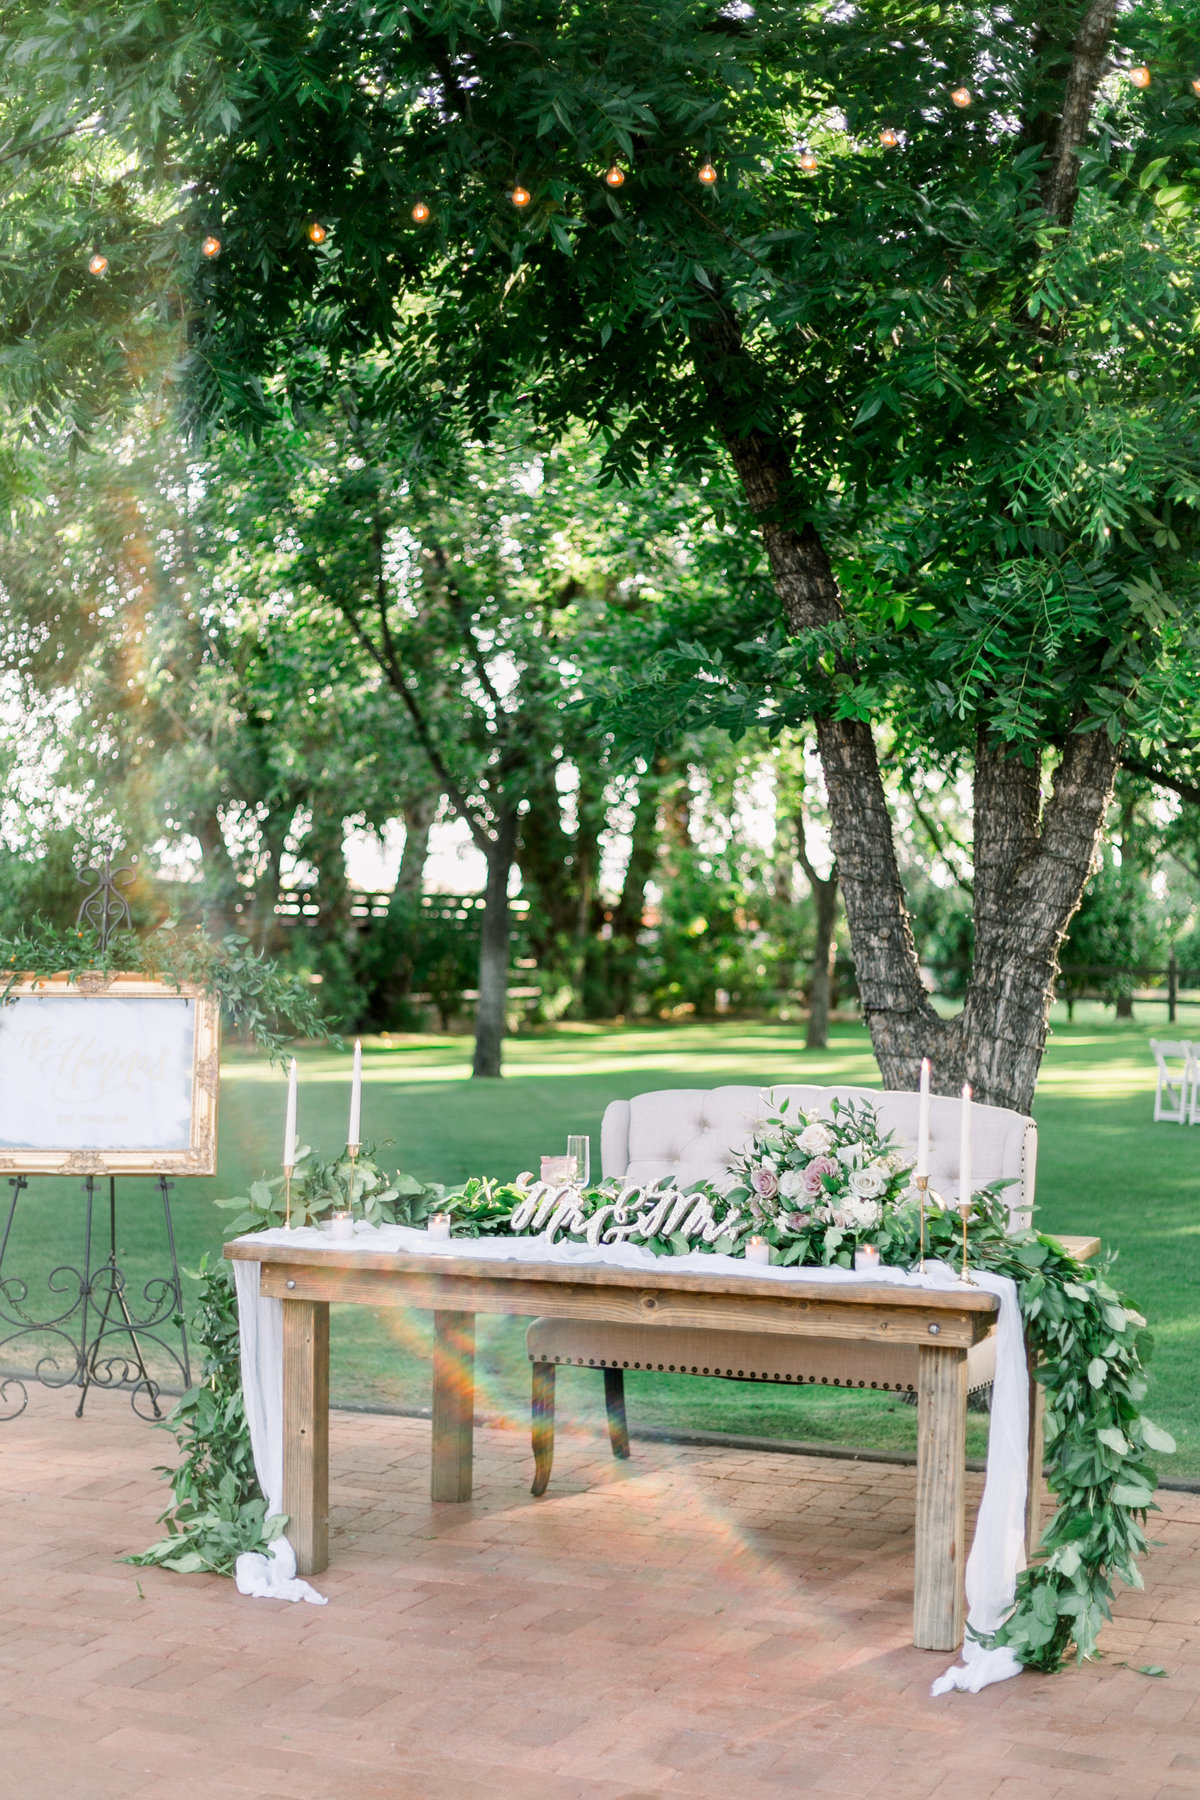 Karlie Colleen Photography - Venue At The Grove - Arizona Wedding - Maggie & Grant -78